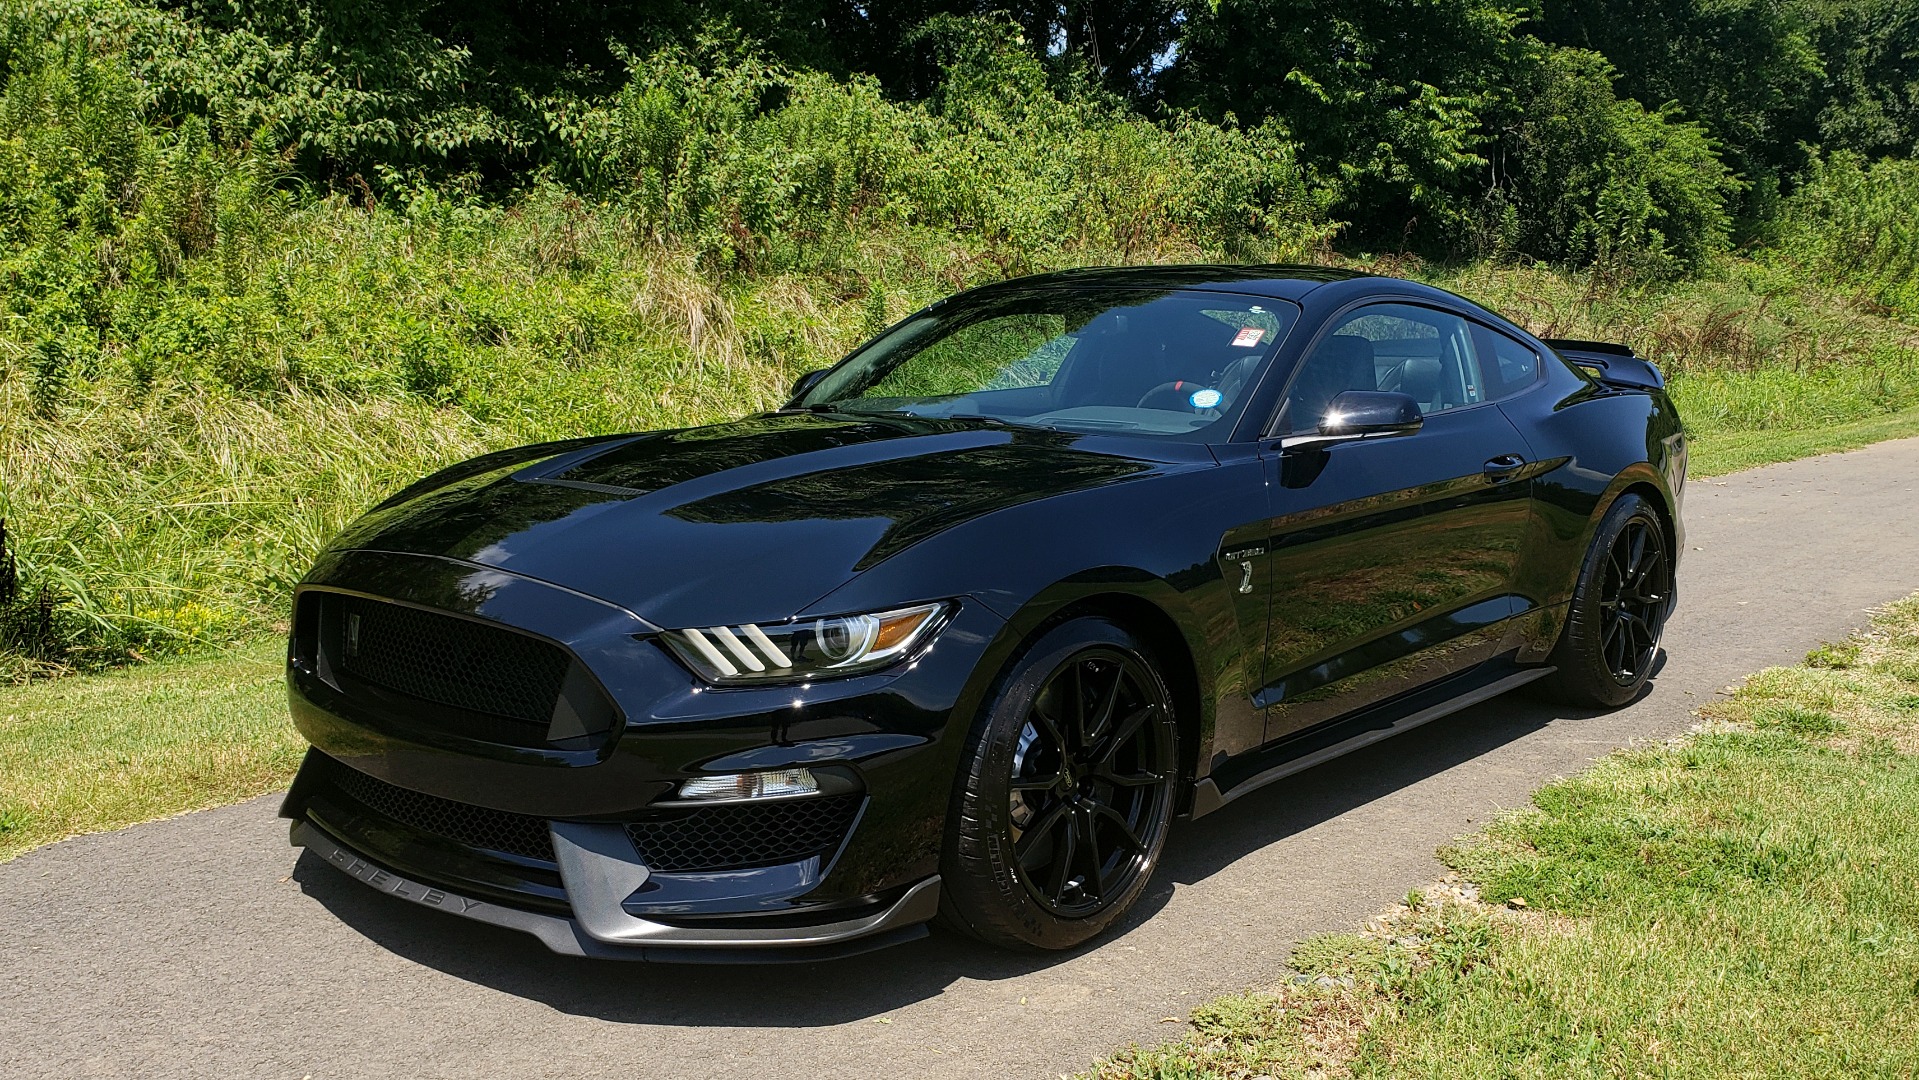 Used 2019 Ford MUSTANG SHELBY GT350 COUPE / TECH PKG / B&O SND / NAV / HNDLNG PKG / REARVIEW for sale Sold at Formula Imports in Charlotte NC 28227 7